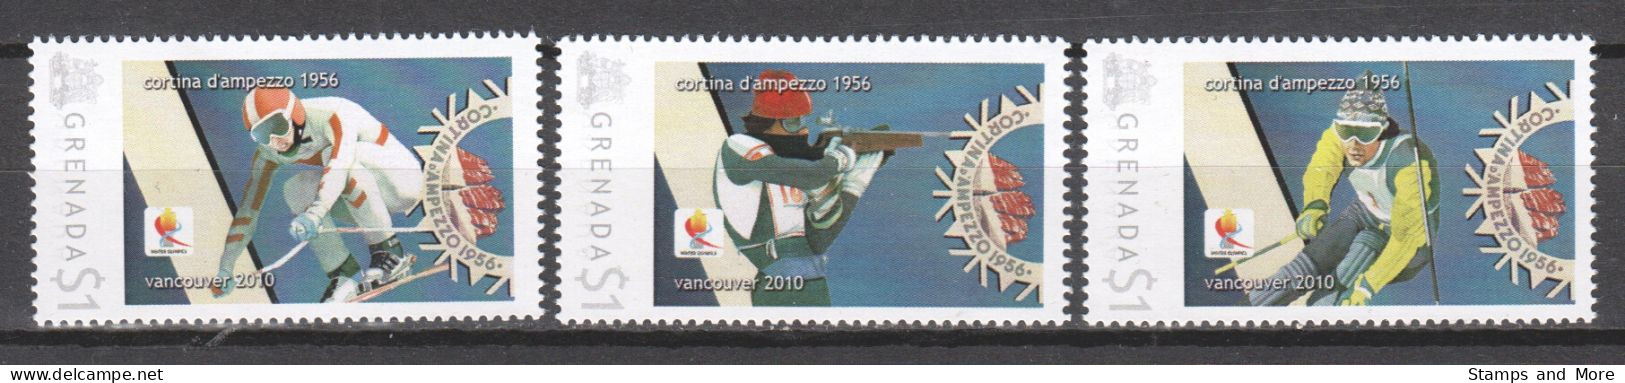 Grenada - Limited Edition Serie 07 MNH - WINTER OLYMPICS VANCOUVER 2010 - CORTINA D'AMPEZZO 1956 (2)(*) - Hiver 2010: Vancouver